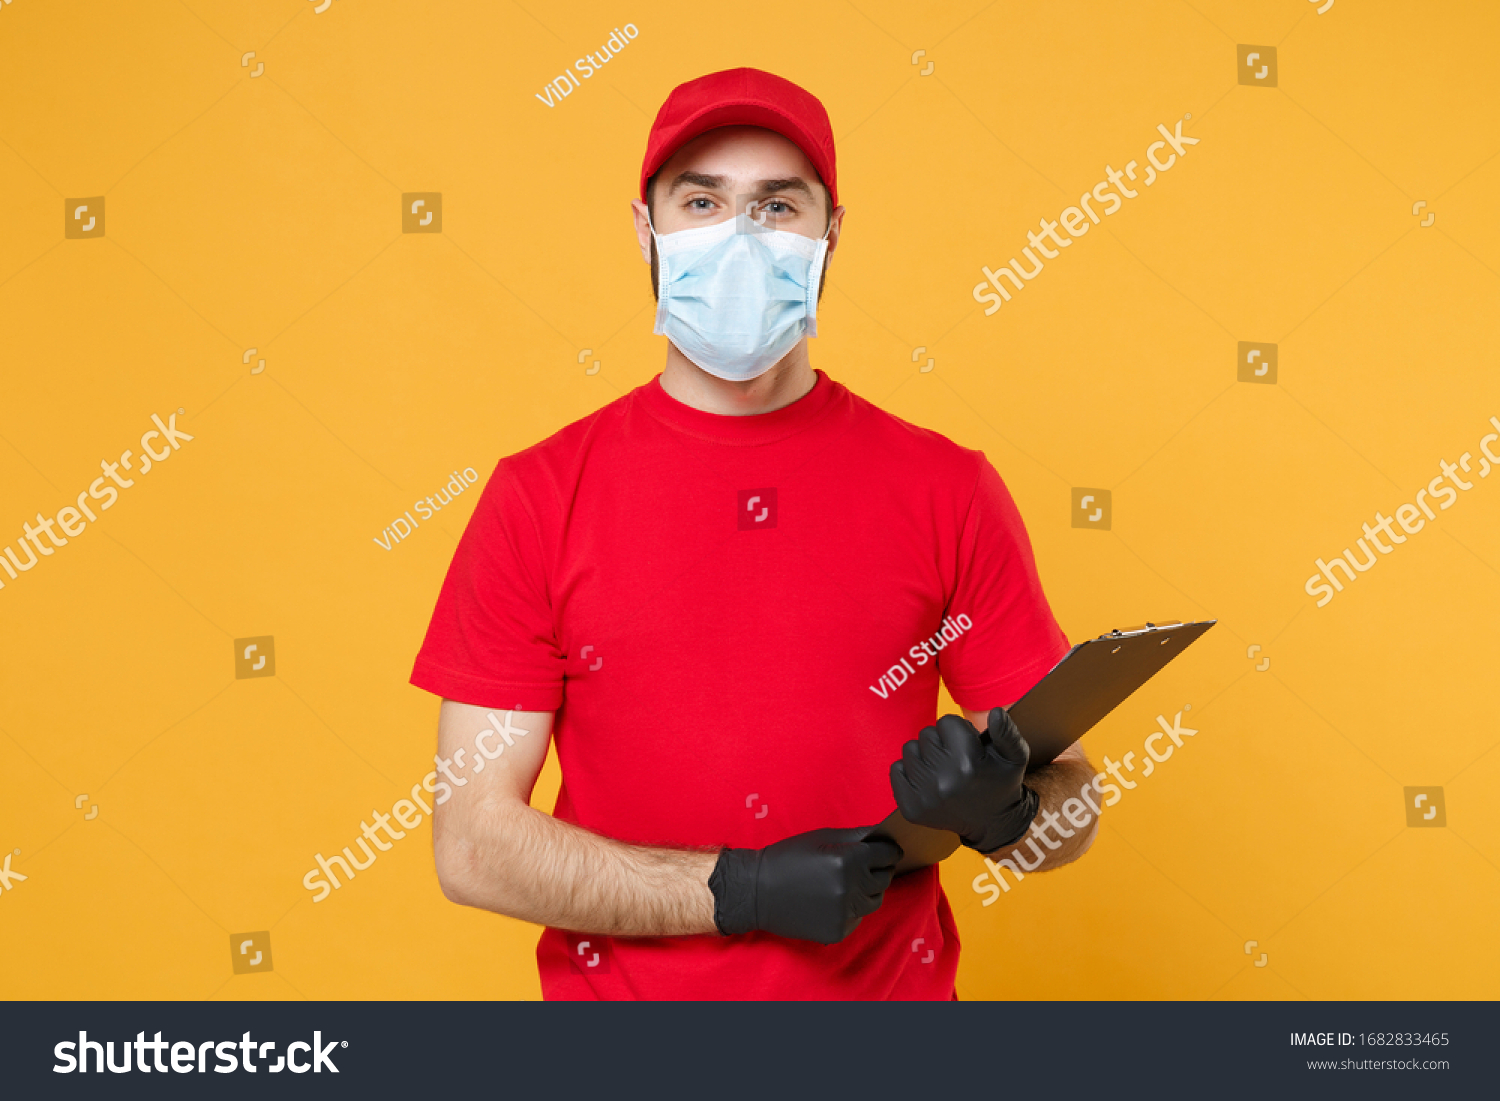 Delivery man in red cap blank t-shirt uniform sterile face mask gloves isolated on yellow background studio Guy employee working courier Service quarantine pandemic coronavirus virus concept #1682833465